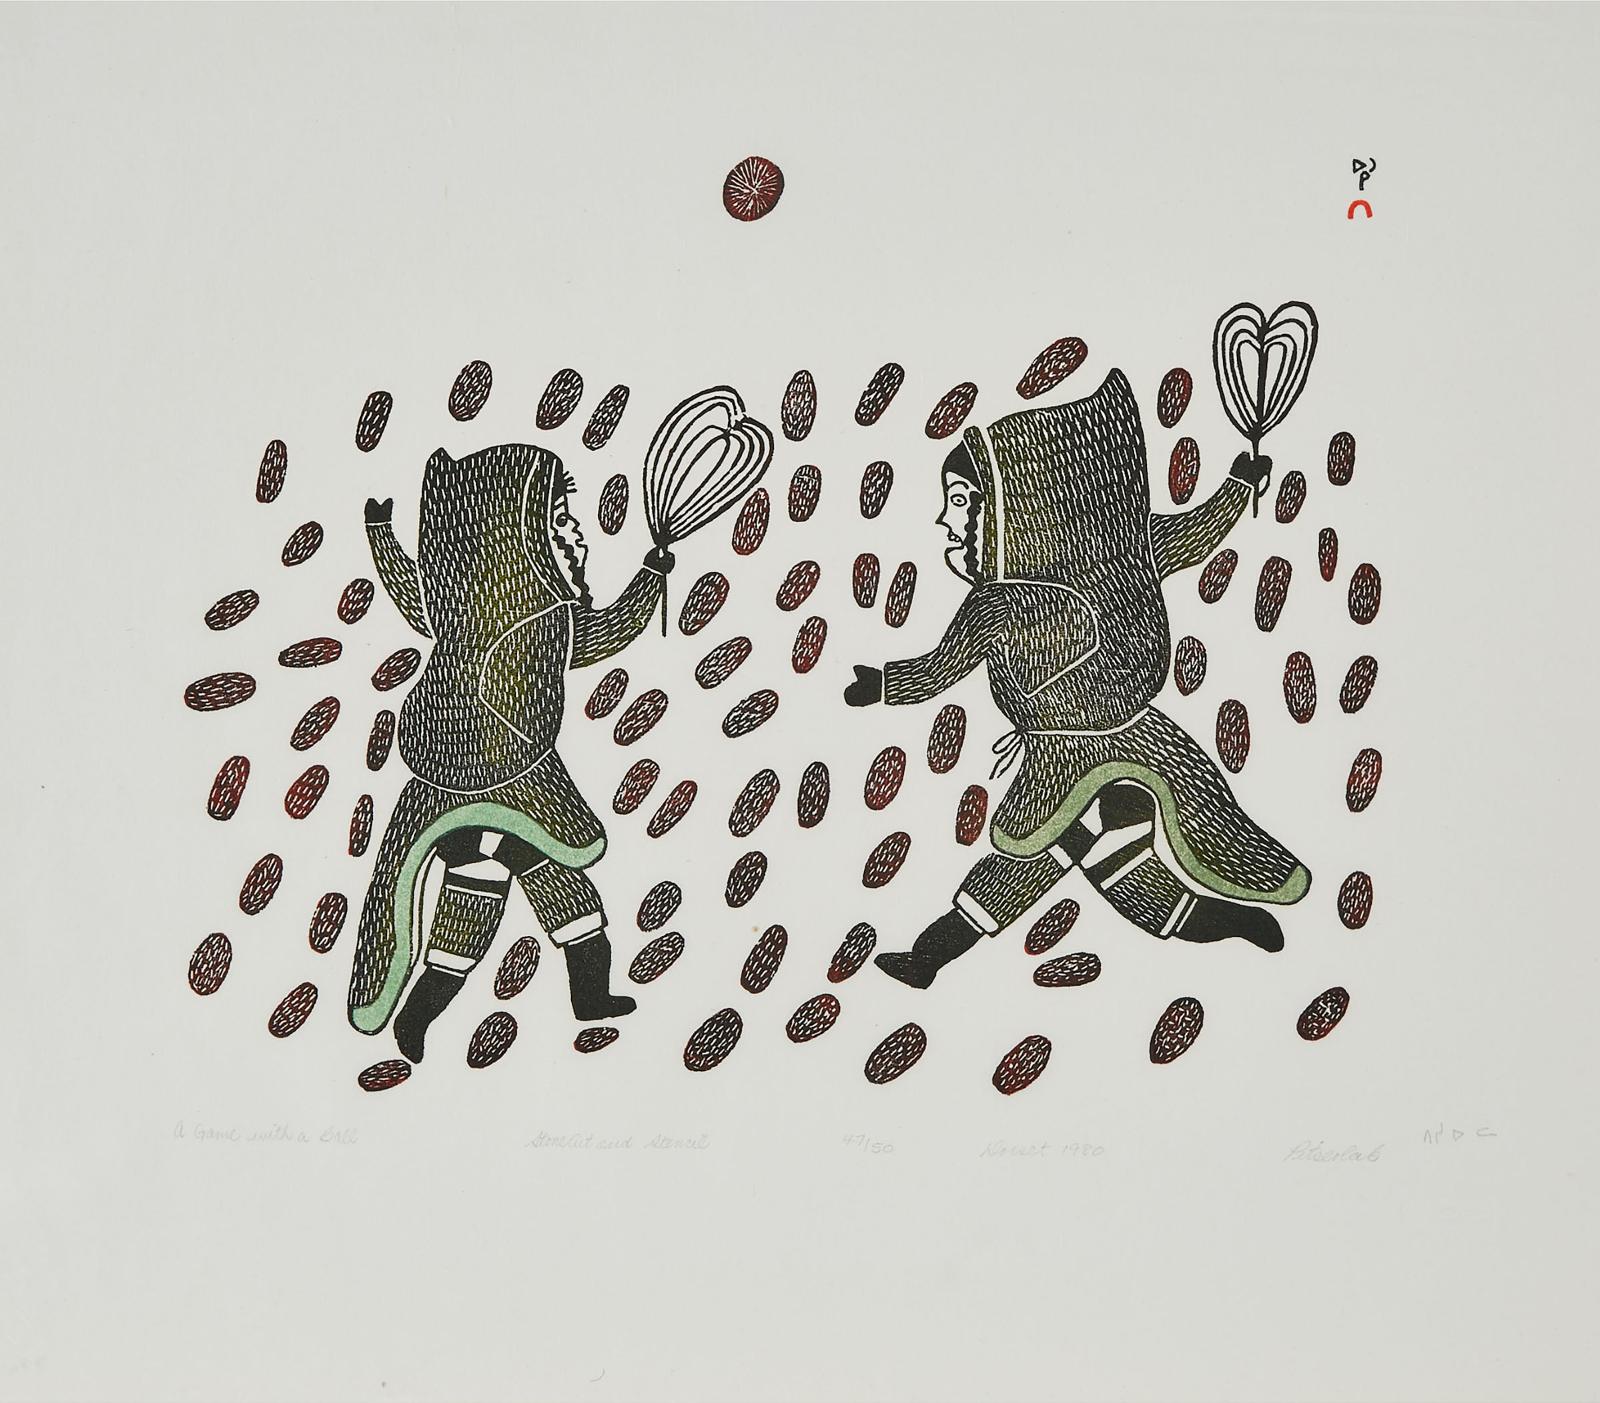 Pitseolak Ashoona (1904-1983) - A Game With A Ball